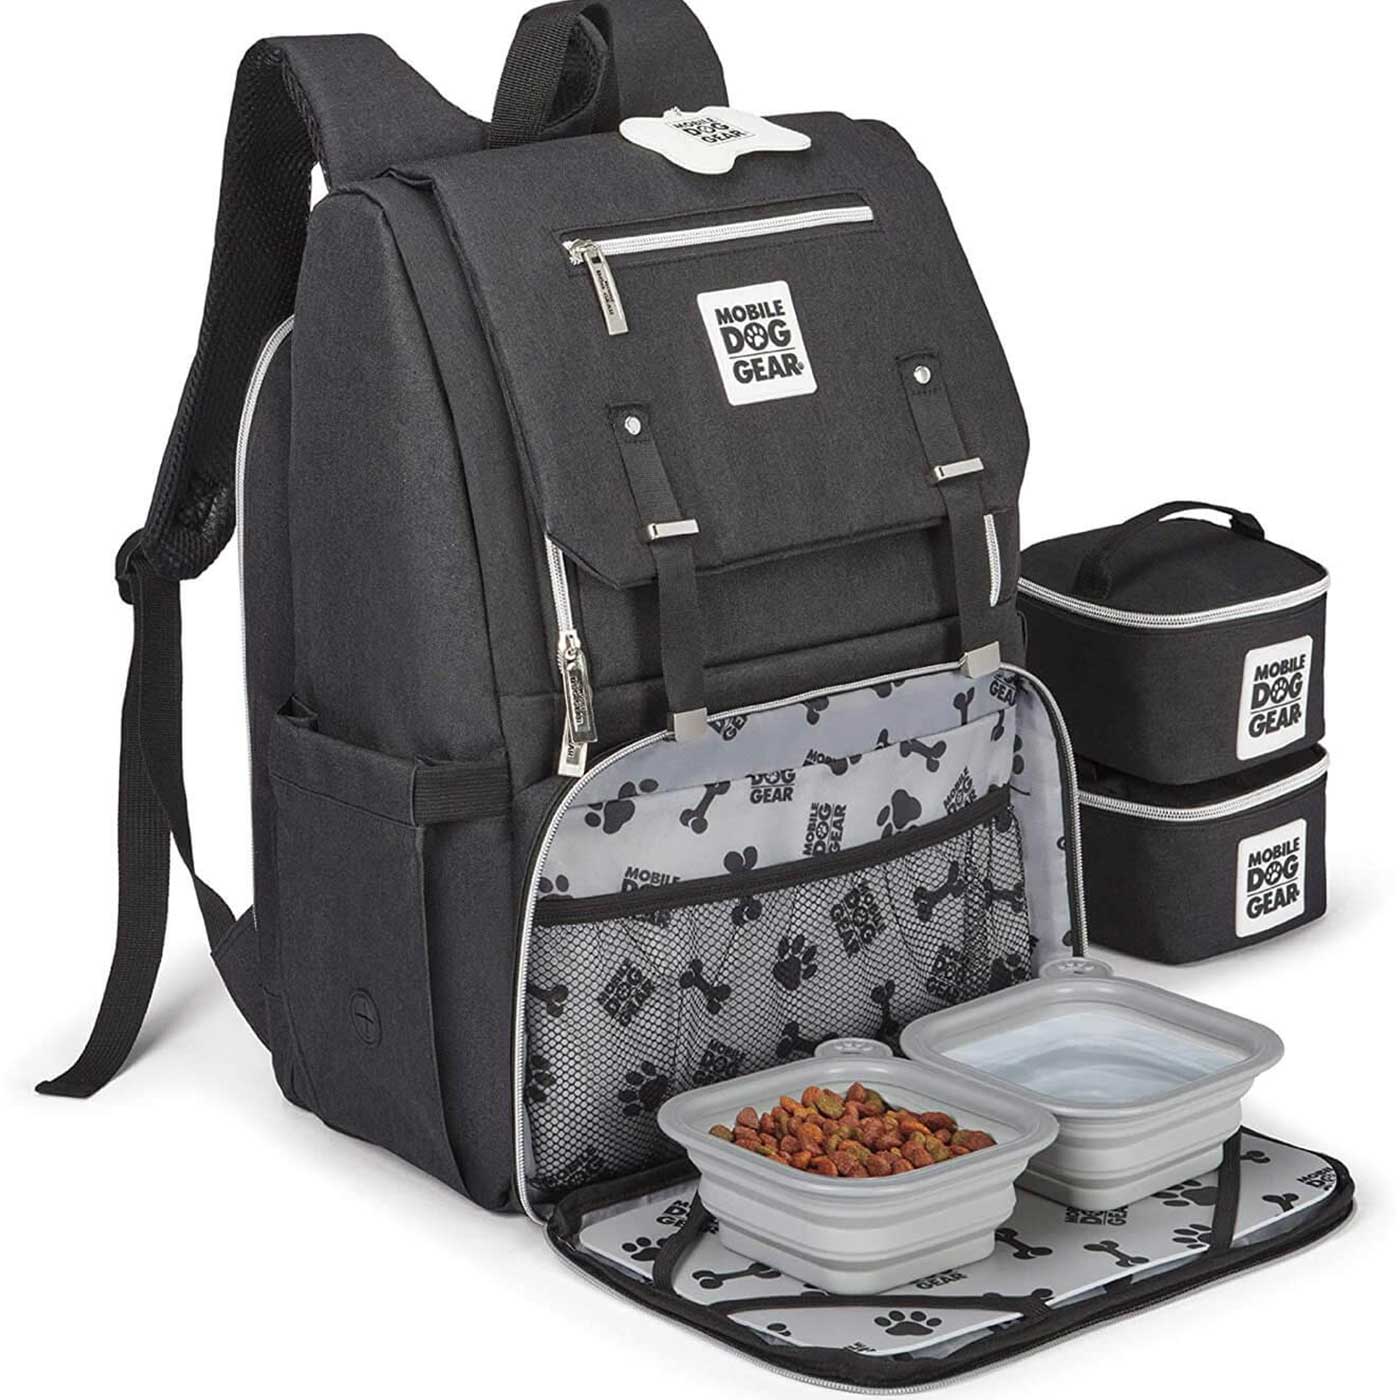 Discover, Mobile Dog Gear Week Away Backpack, in Black. The Perfect Away Bag for any Pet Parent, Featuring dividers to stack food and built in waste bag dispenser. Also Included feeding set, collapsible silicone bowls and placemat! The Perfect Gift For travel, meets airline requirements. Available Now at Lords & Labradors